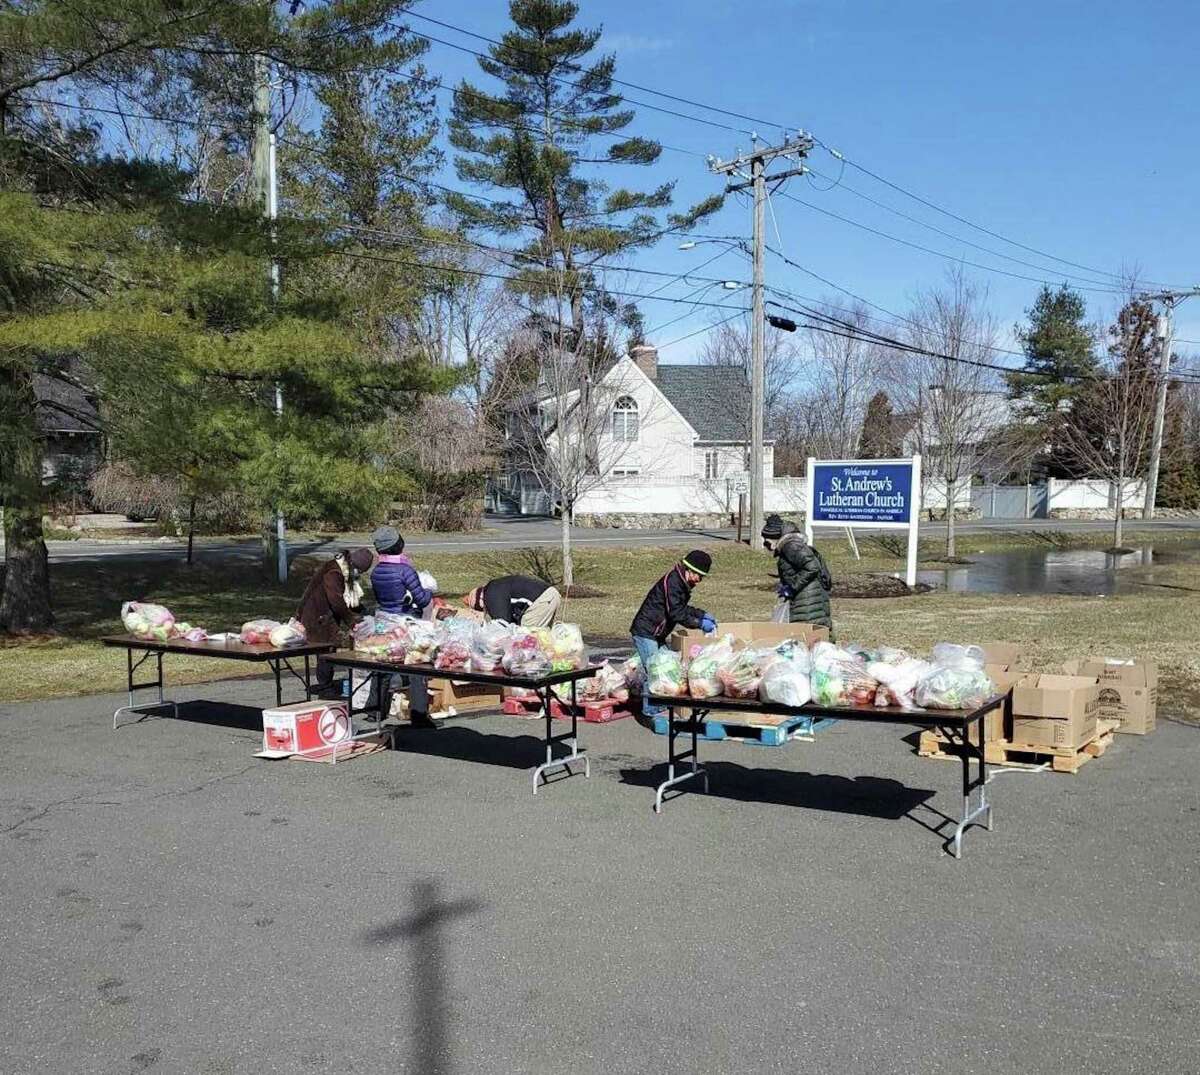 Ridgefield's Department of Social Services hosted its second mobile food pantry event of 2021 in partnership with Connecticut Food Bank at St. Andrew's Lutheran Church on Ivy Hill Road. Due to pandemic protocols, the event has an added focus on sustainability.